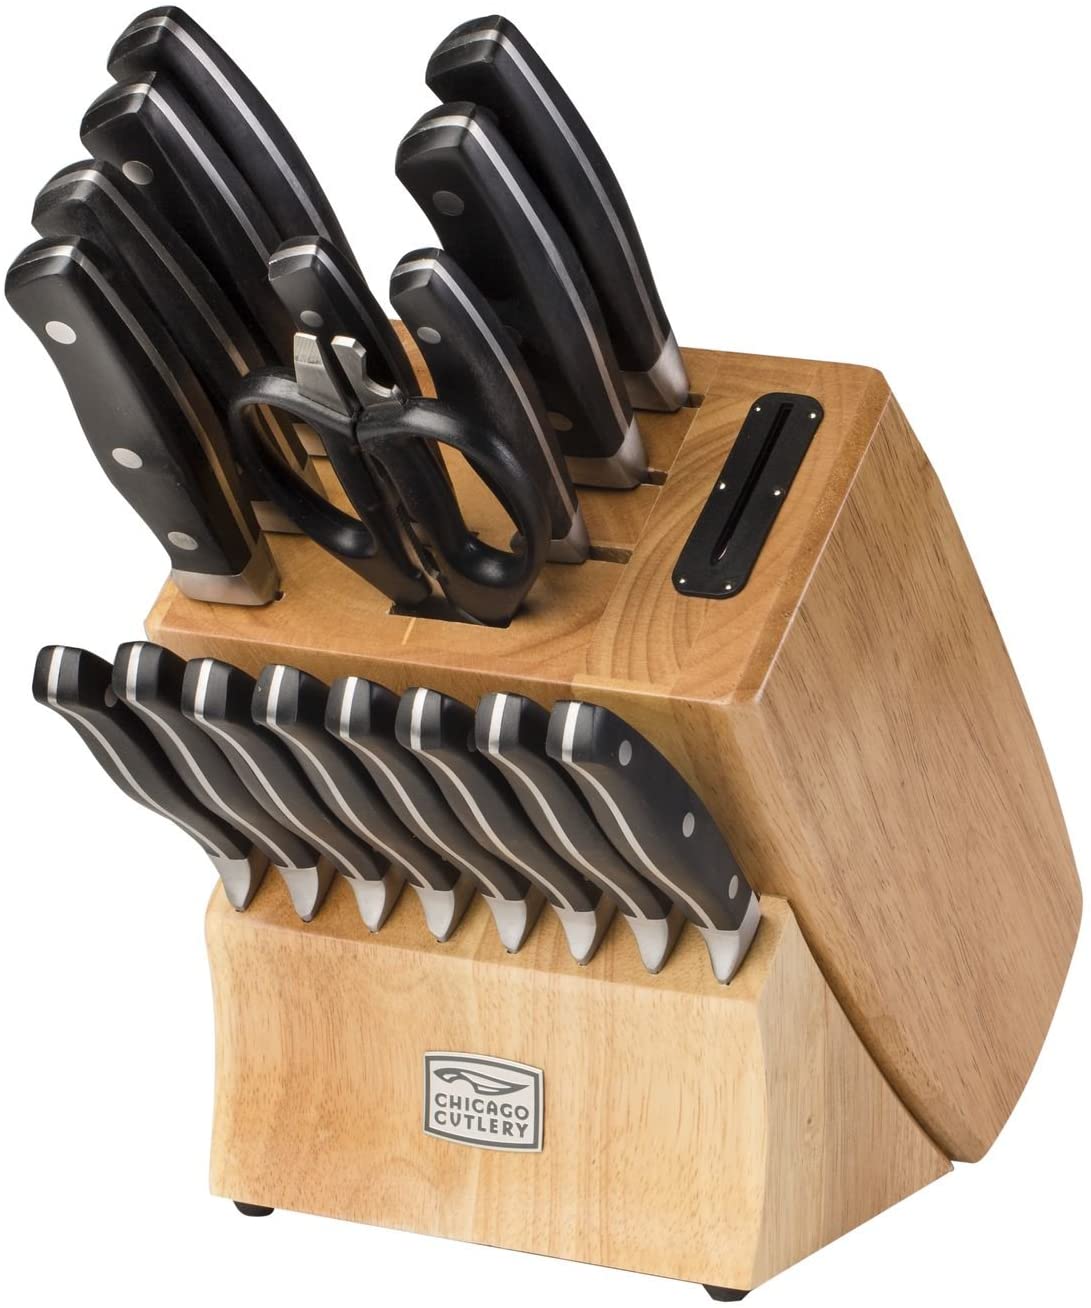 Chicago Cutlery Insignia 2 18 Piece Knife Block Set with In-Block Knife Sharpener